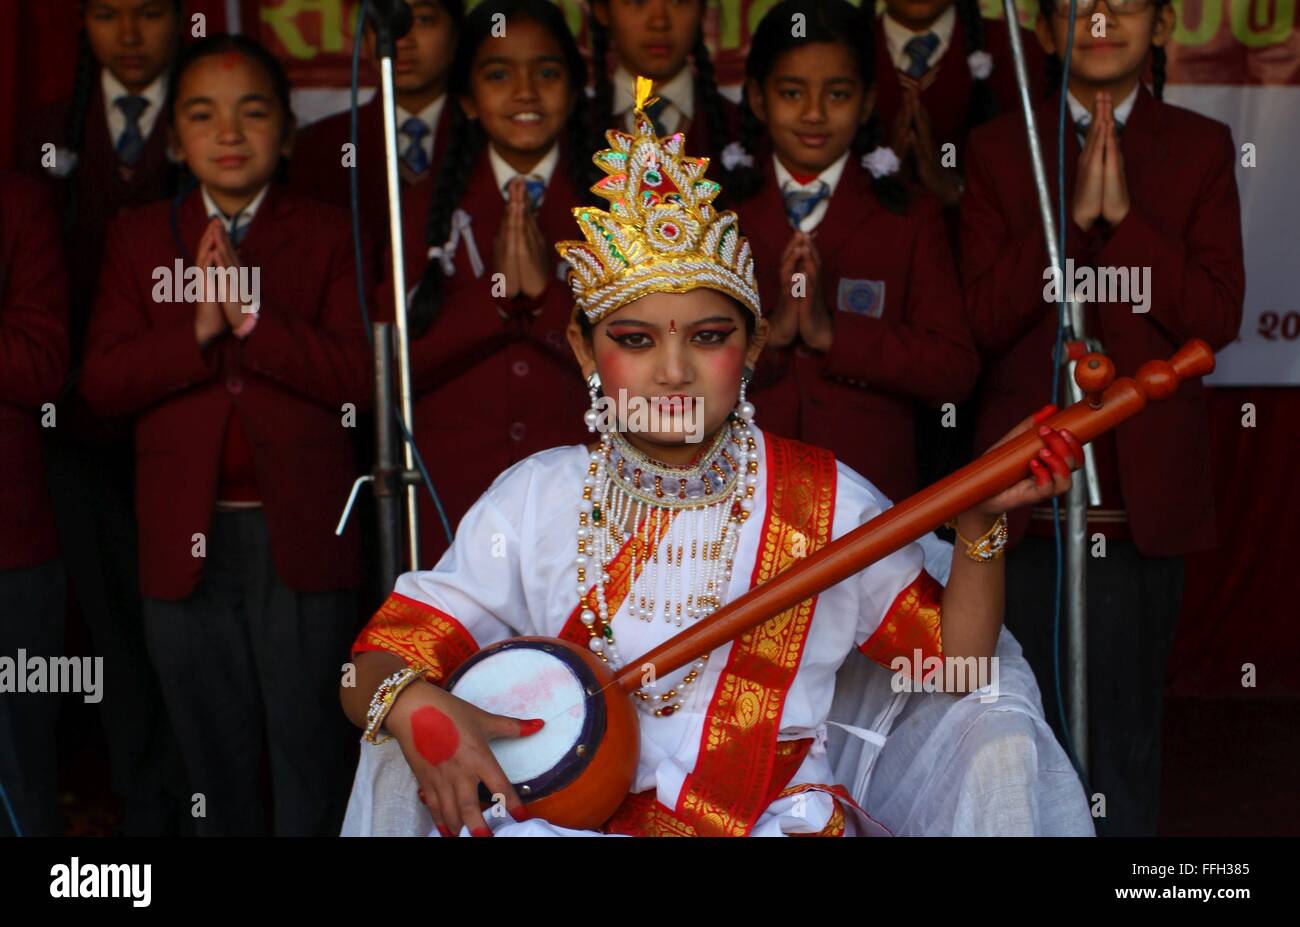 Kathmandu, Nepal. 13th Feb, 2016. A girl dressed up as Goddess Saraswati, goddess of Knowledge, participates in a celebration of Shree Panchami Festival at a school in Kathmandu, Nepal, Feb. 13, 2016. Nepalese Hindu Community celebrates this very day as the day of worshipping the Goddess of Knowledge, Saraswati. Students show their humble respect to Goddess Saraswati for knowledge and learning. This day also signifies as the beginning of spring season. Credit:  Sunil Sharma/Xinhua/Alamy Live News Stock Photo